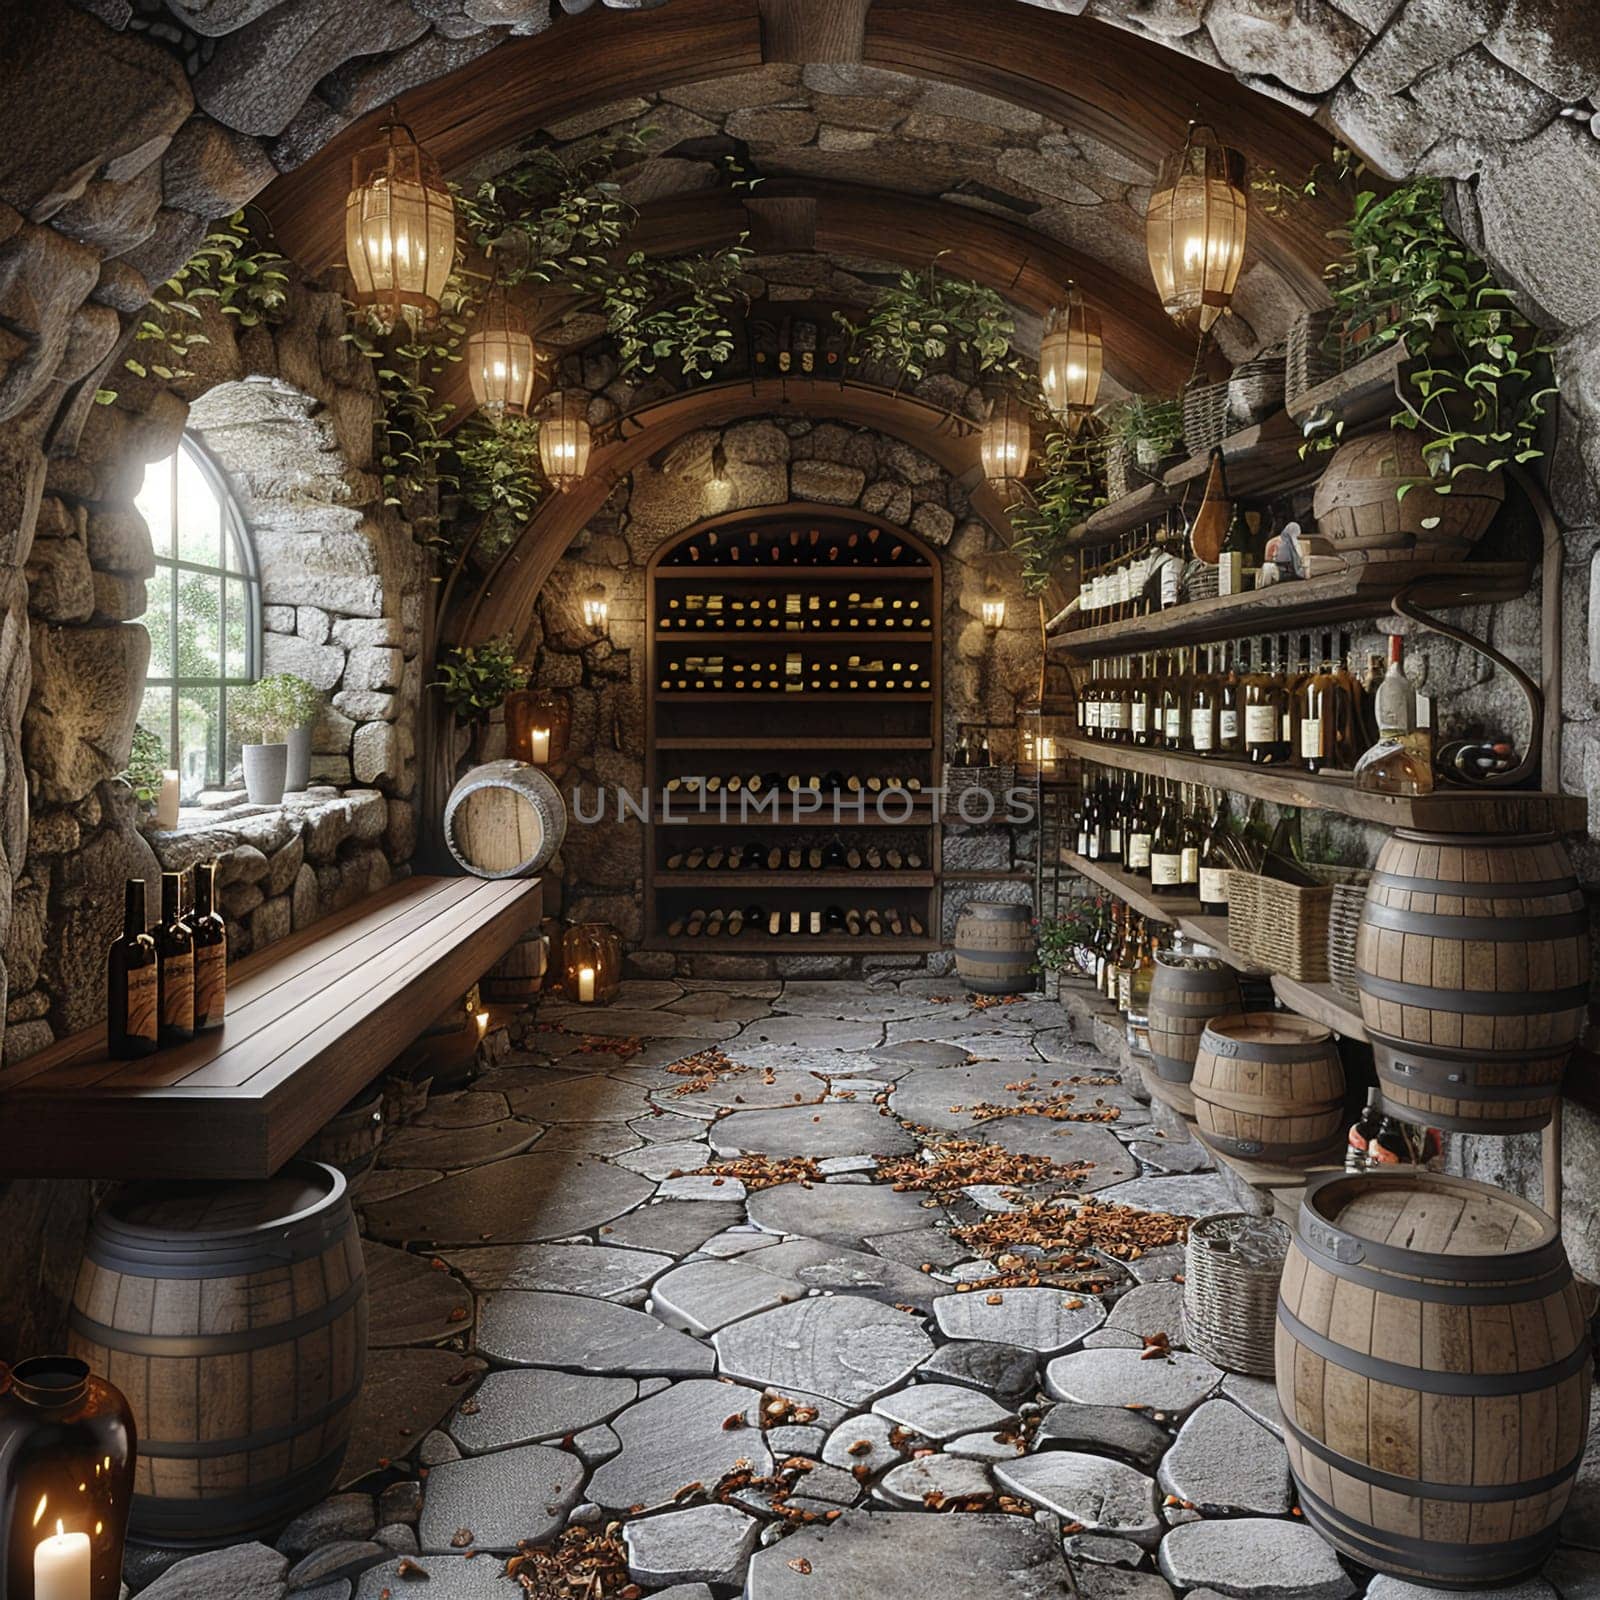 Rustic wine cellar with stone walls and wooden wine racksup32K HD